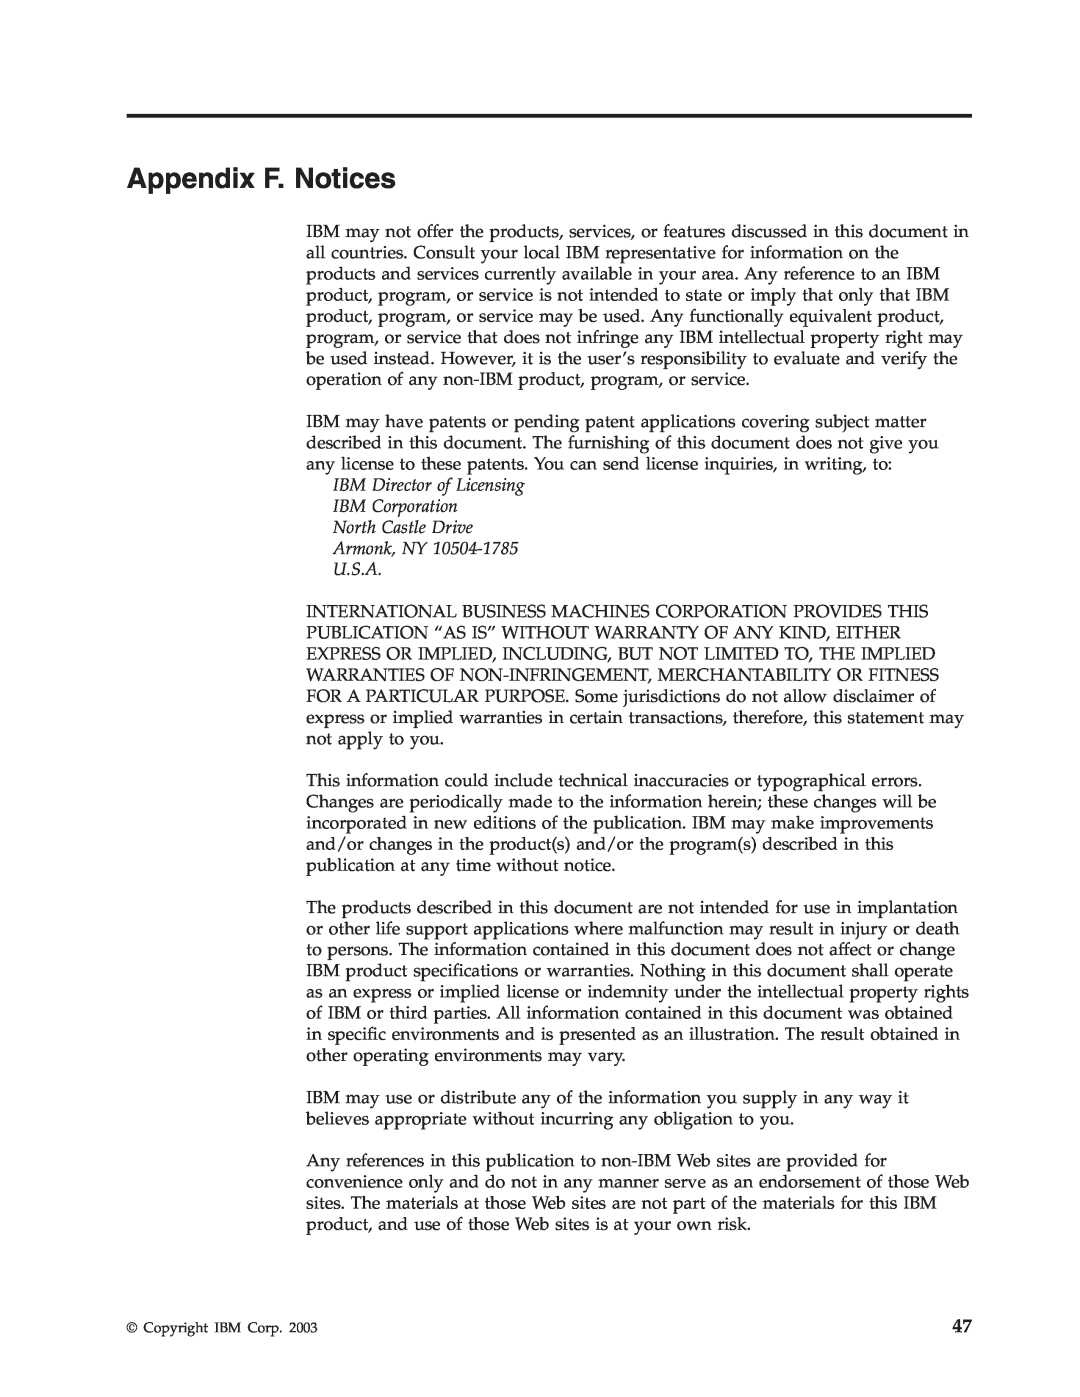 Trust Computer Products IBM 802.11a/b/g Wireless CardBus Adapter manual Appendix F. Notices, Armonk, NY U.S.A 